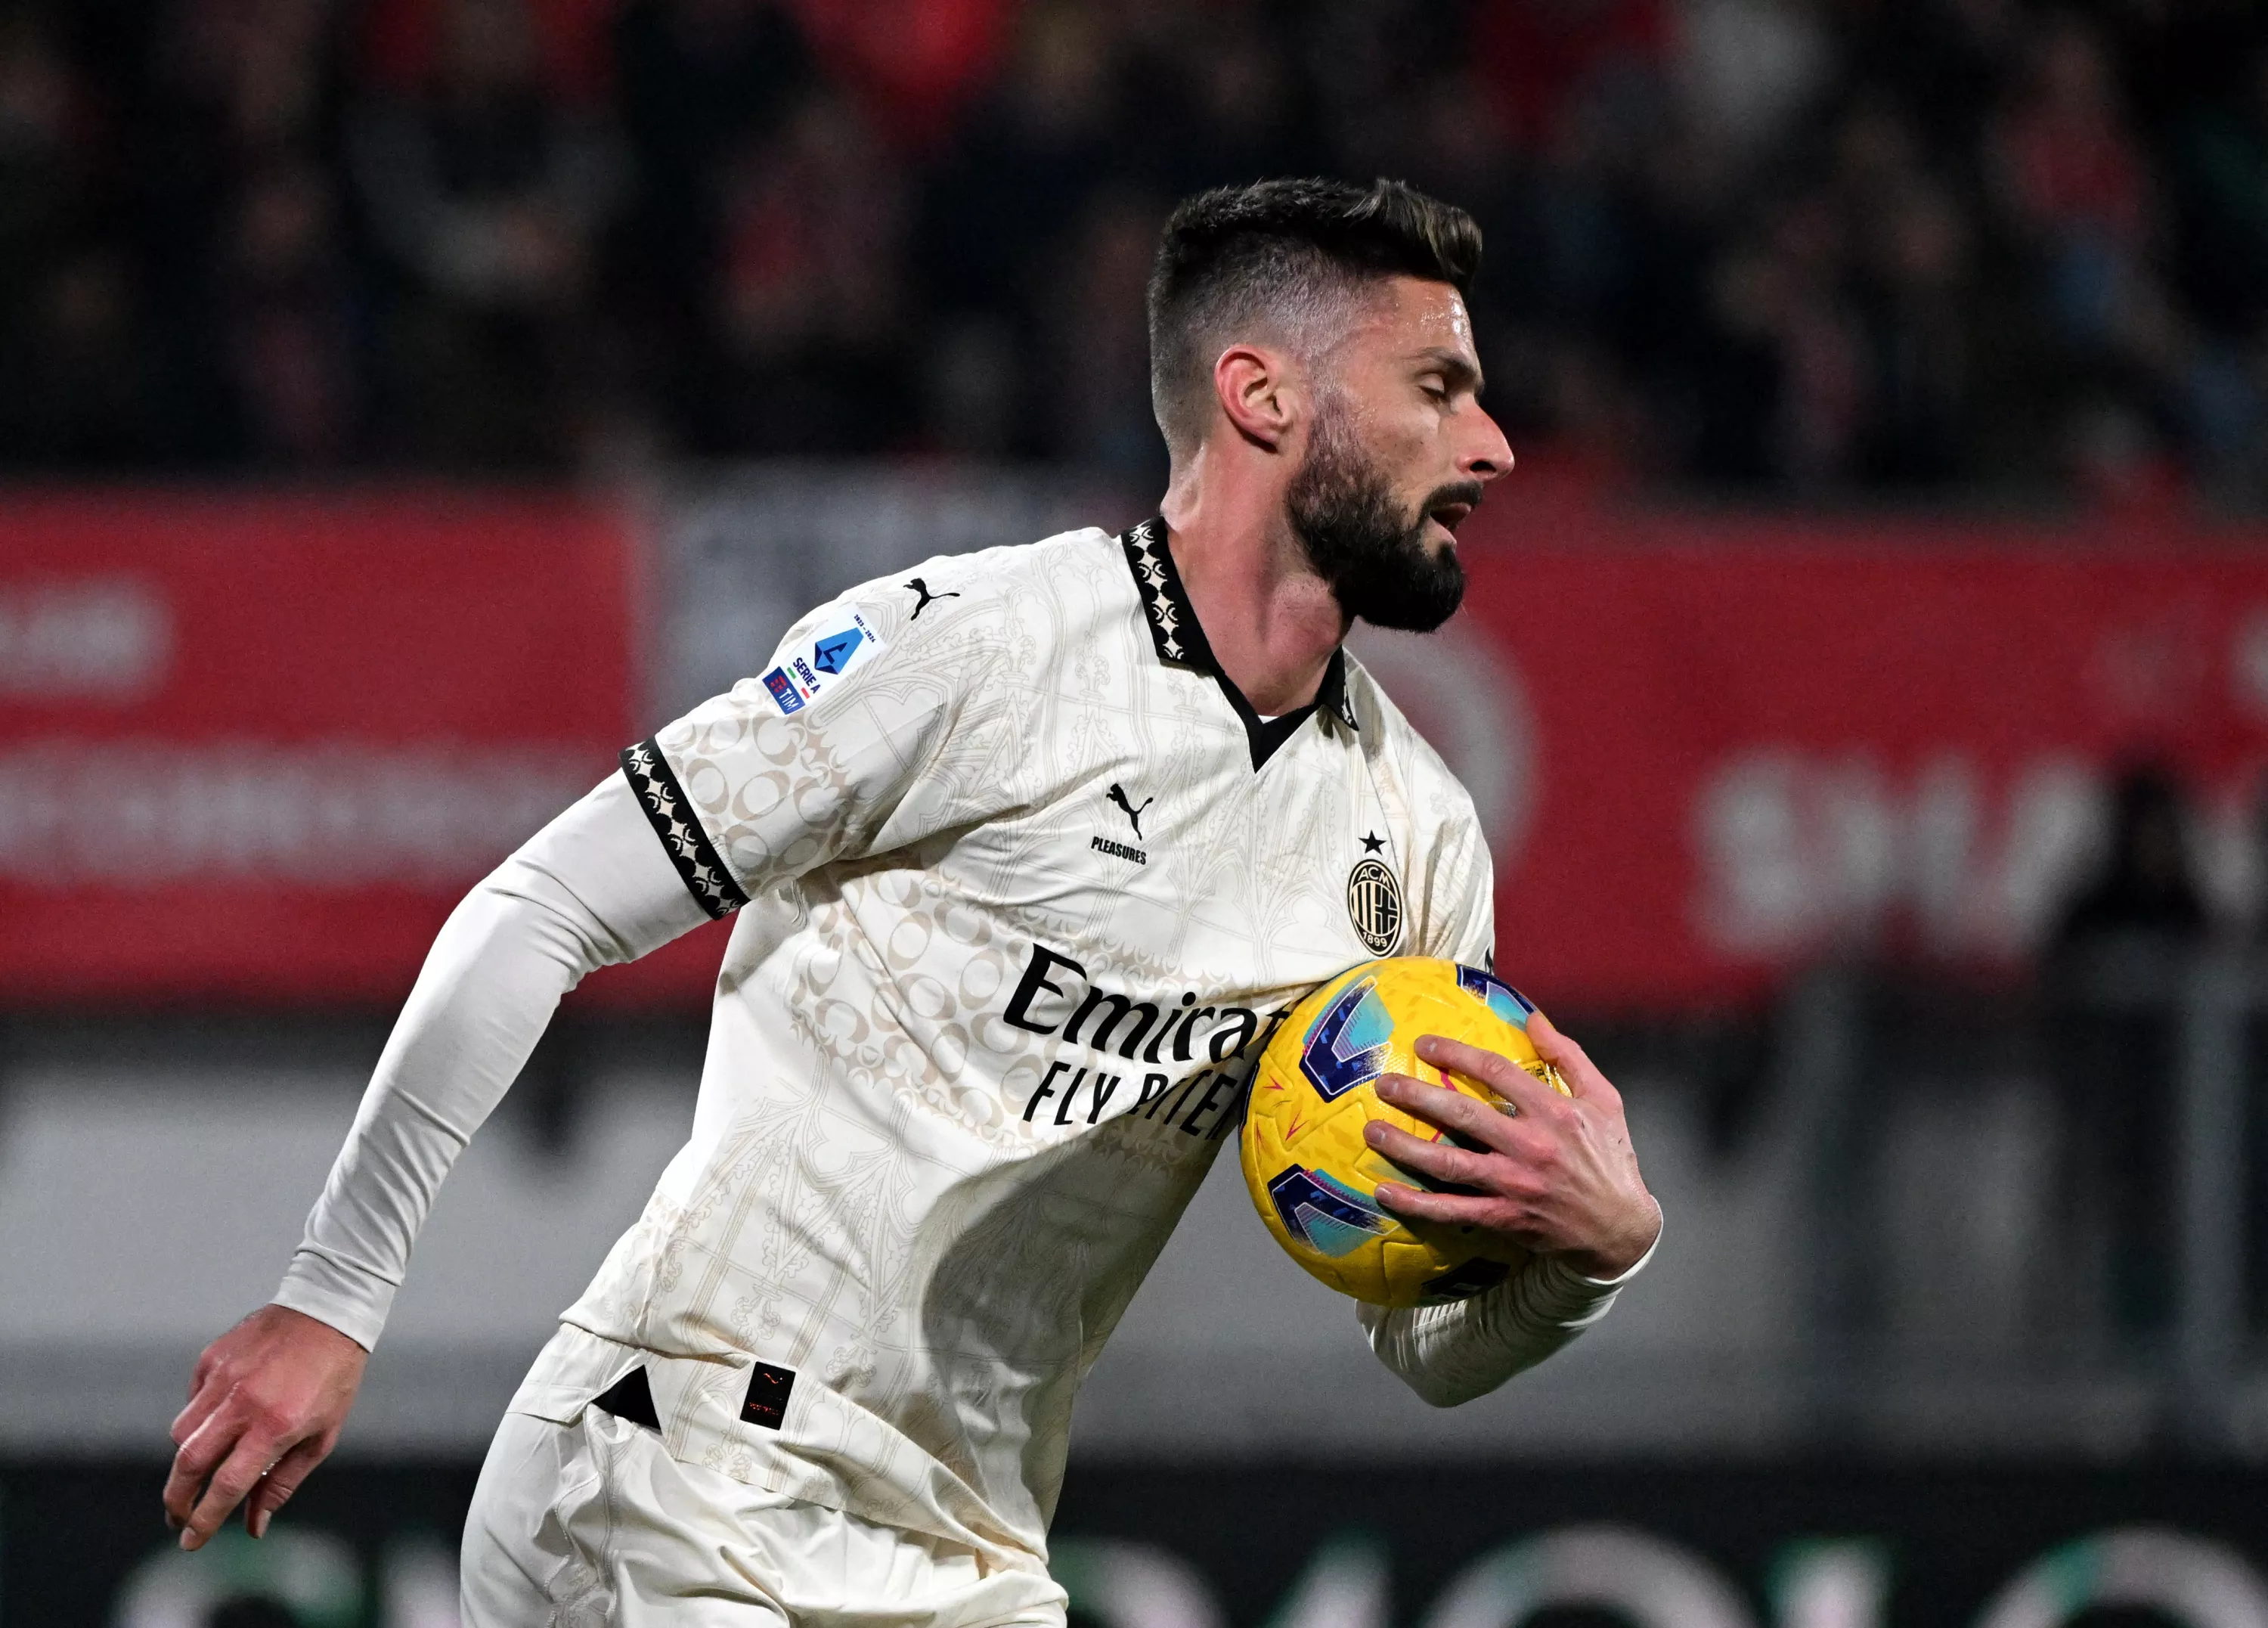 Olivier Giroud is giving serious thought about moving to the MLS at the end of the season. He’ll make the call in May, but it's gaining steam.